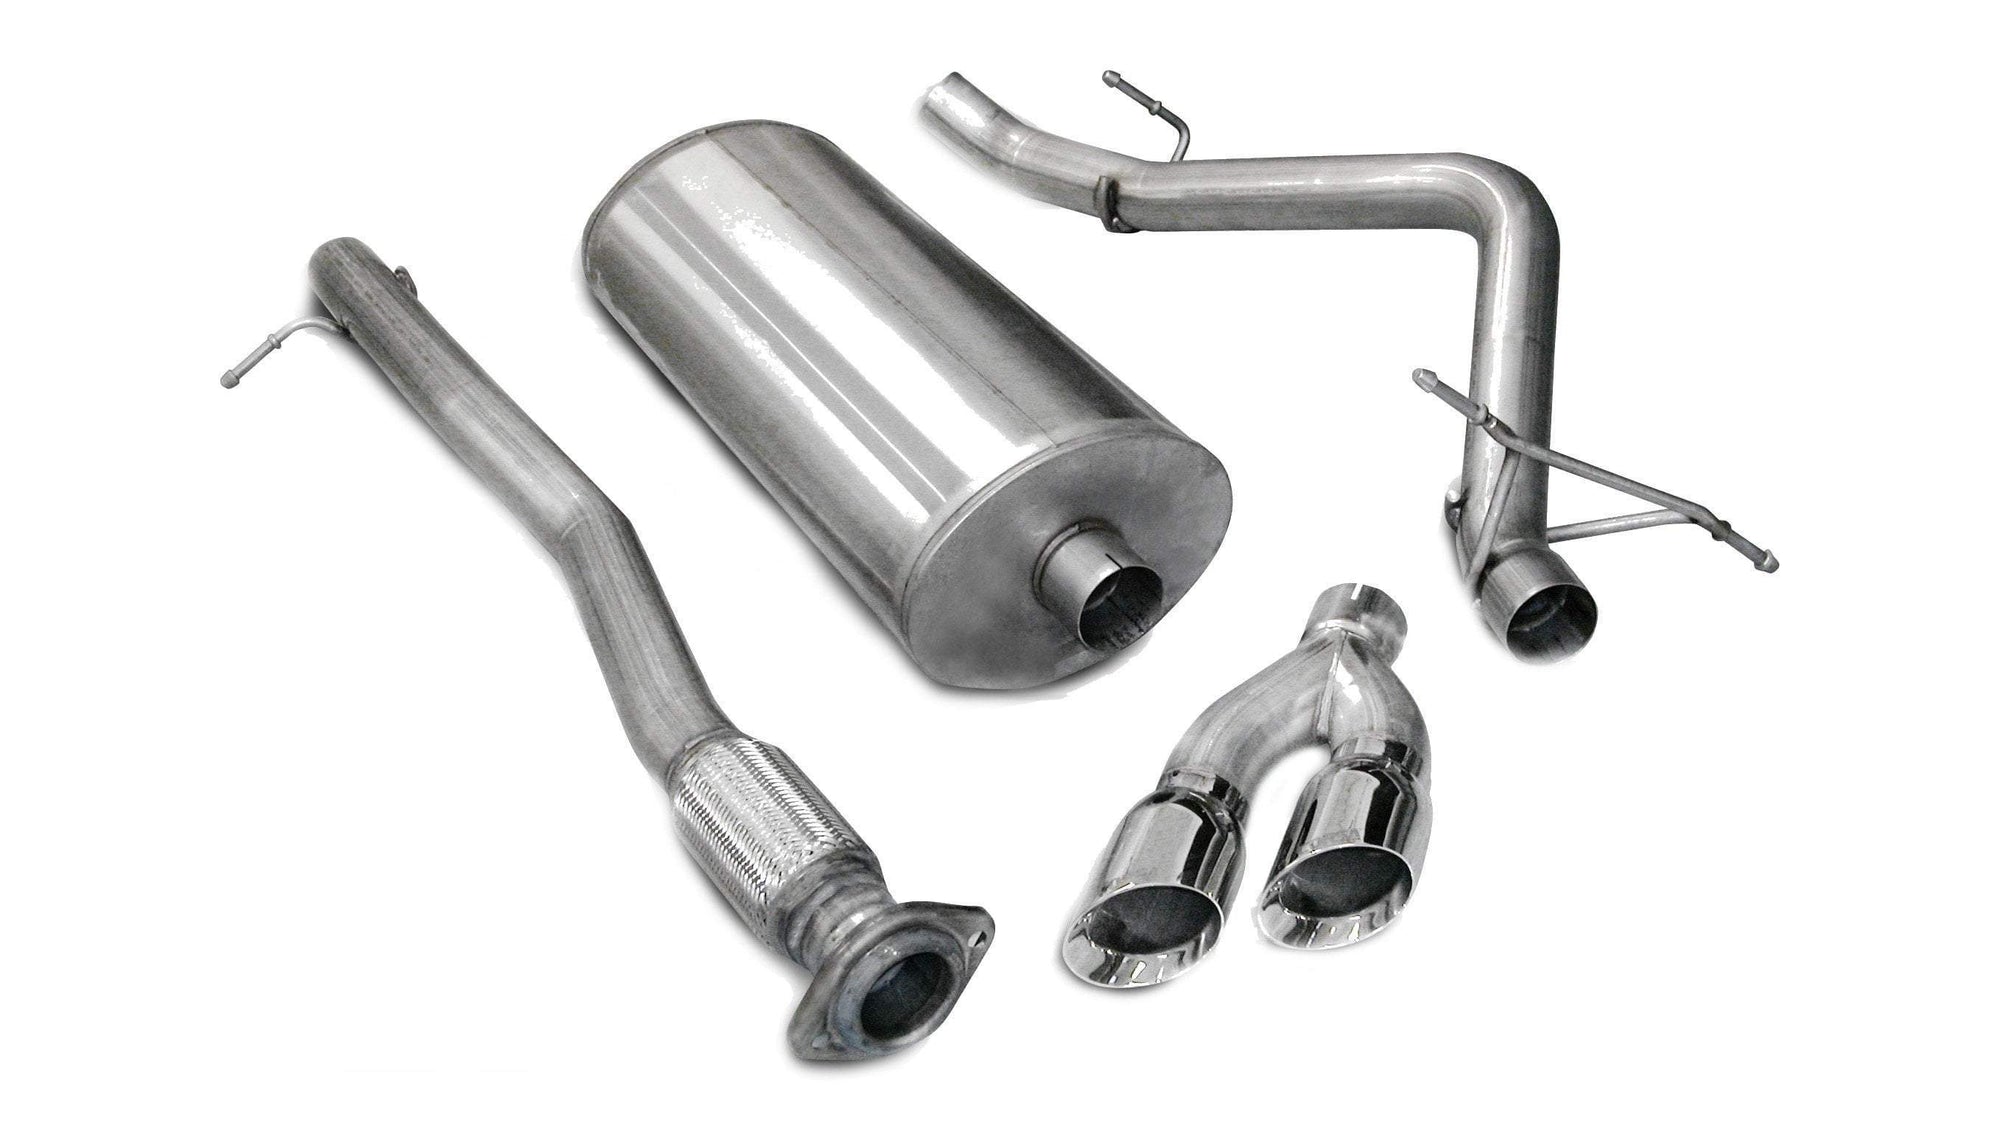 CORSA PERFORMANCE Cat-Back Exhaust Polished / Sport / Single Side - Twin 4.0in 2007-2008 Chevrolet Silverado, GMC Sierra 4.8L, 5.3L, 6.0L V8, 3.0" Single Side Exit Catback Exhaust System with Twin 4" Tips (14259) Sport Sound Level